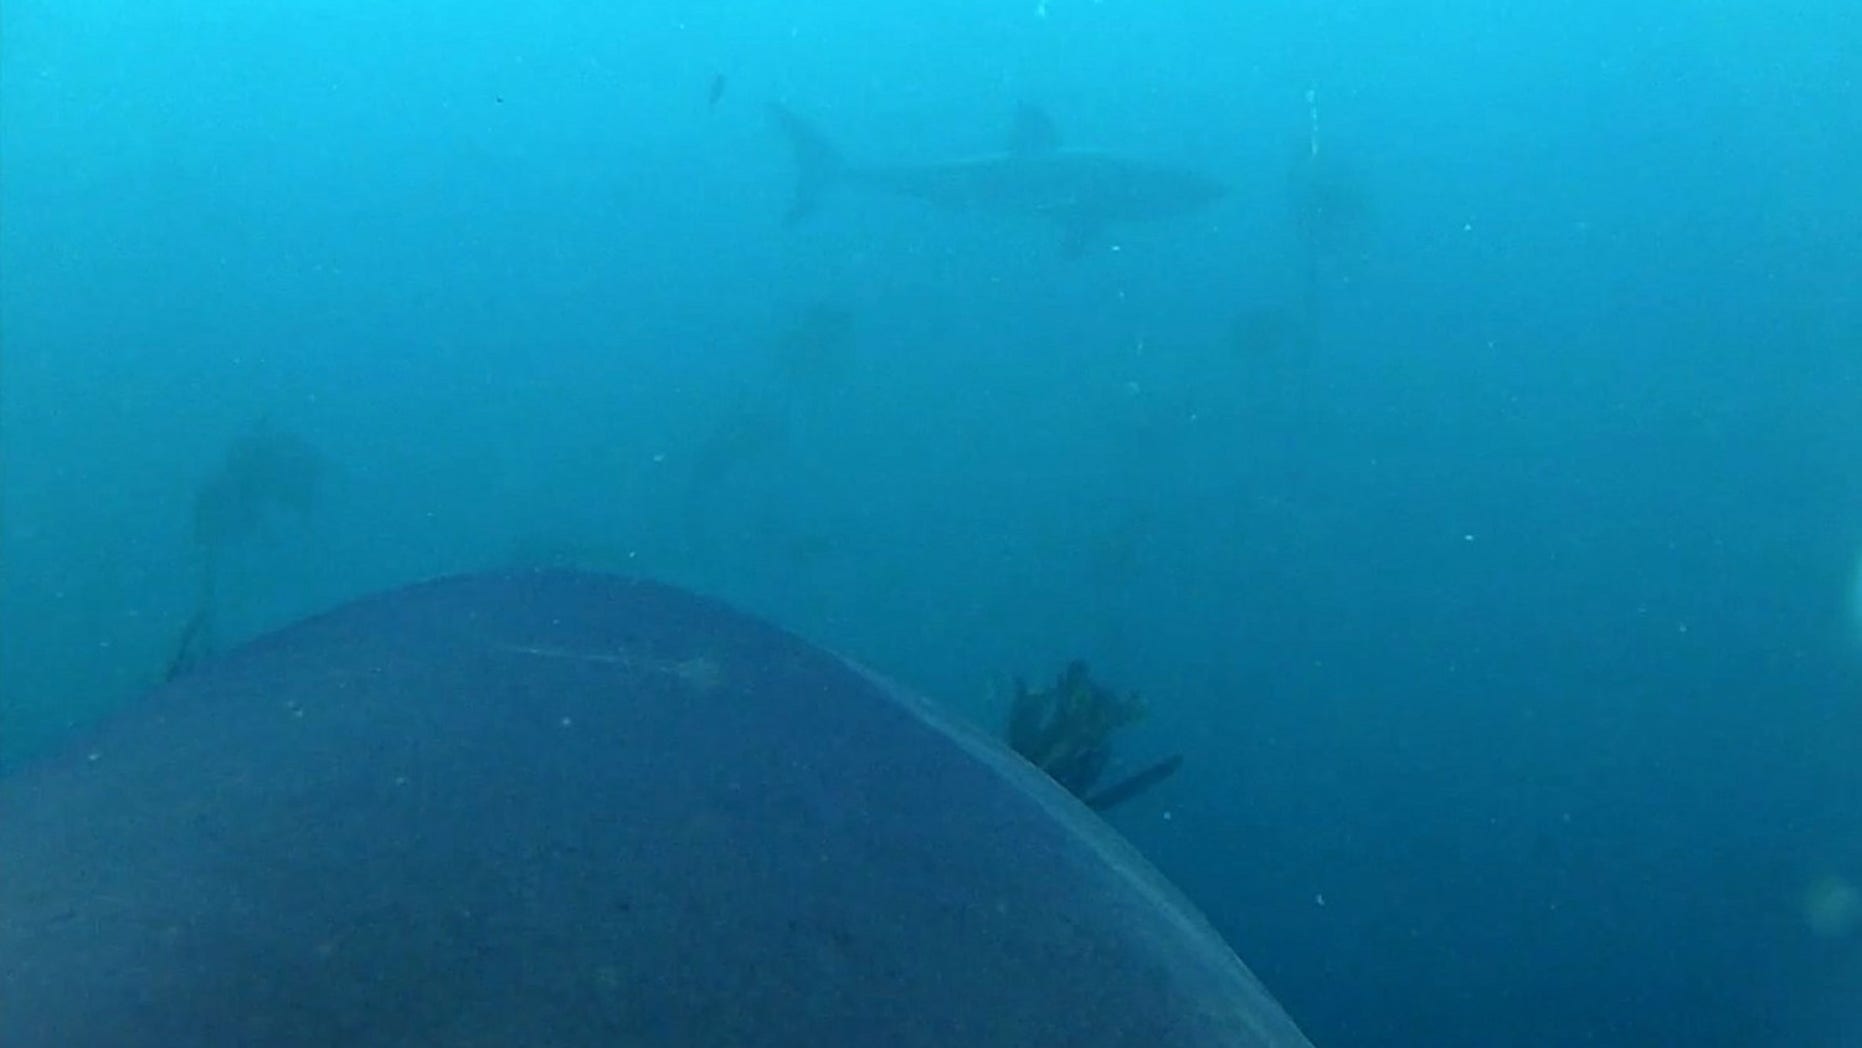 One of the great white sharks participating in the experiment saw another great white shark, and the video camera captured the encounter.